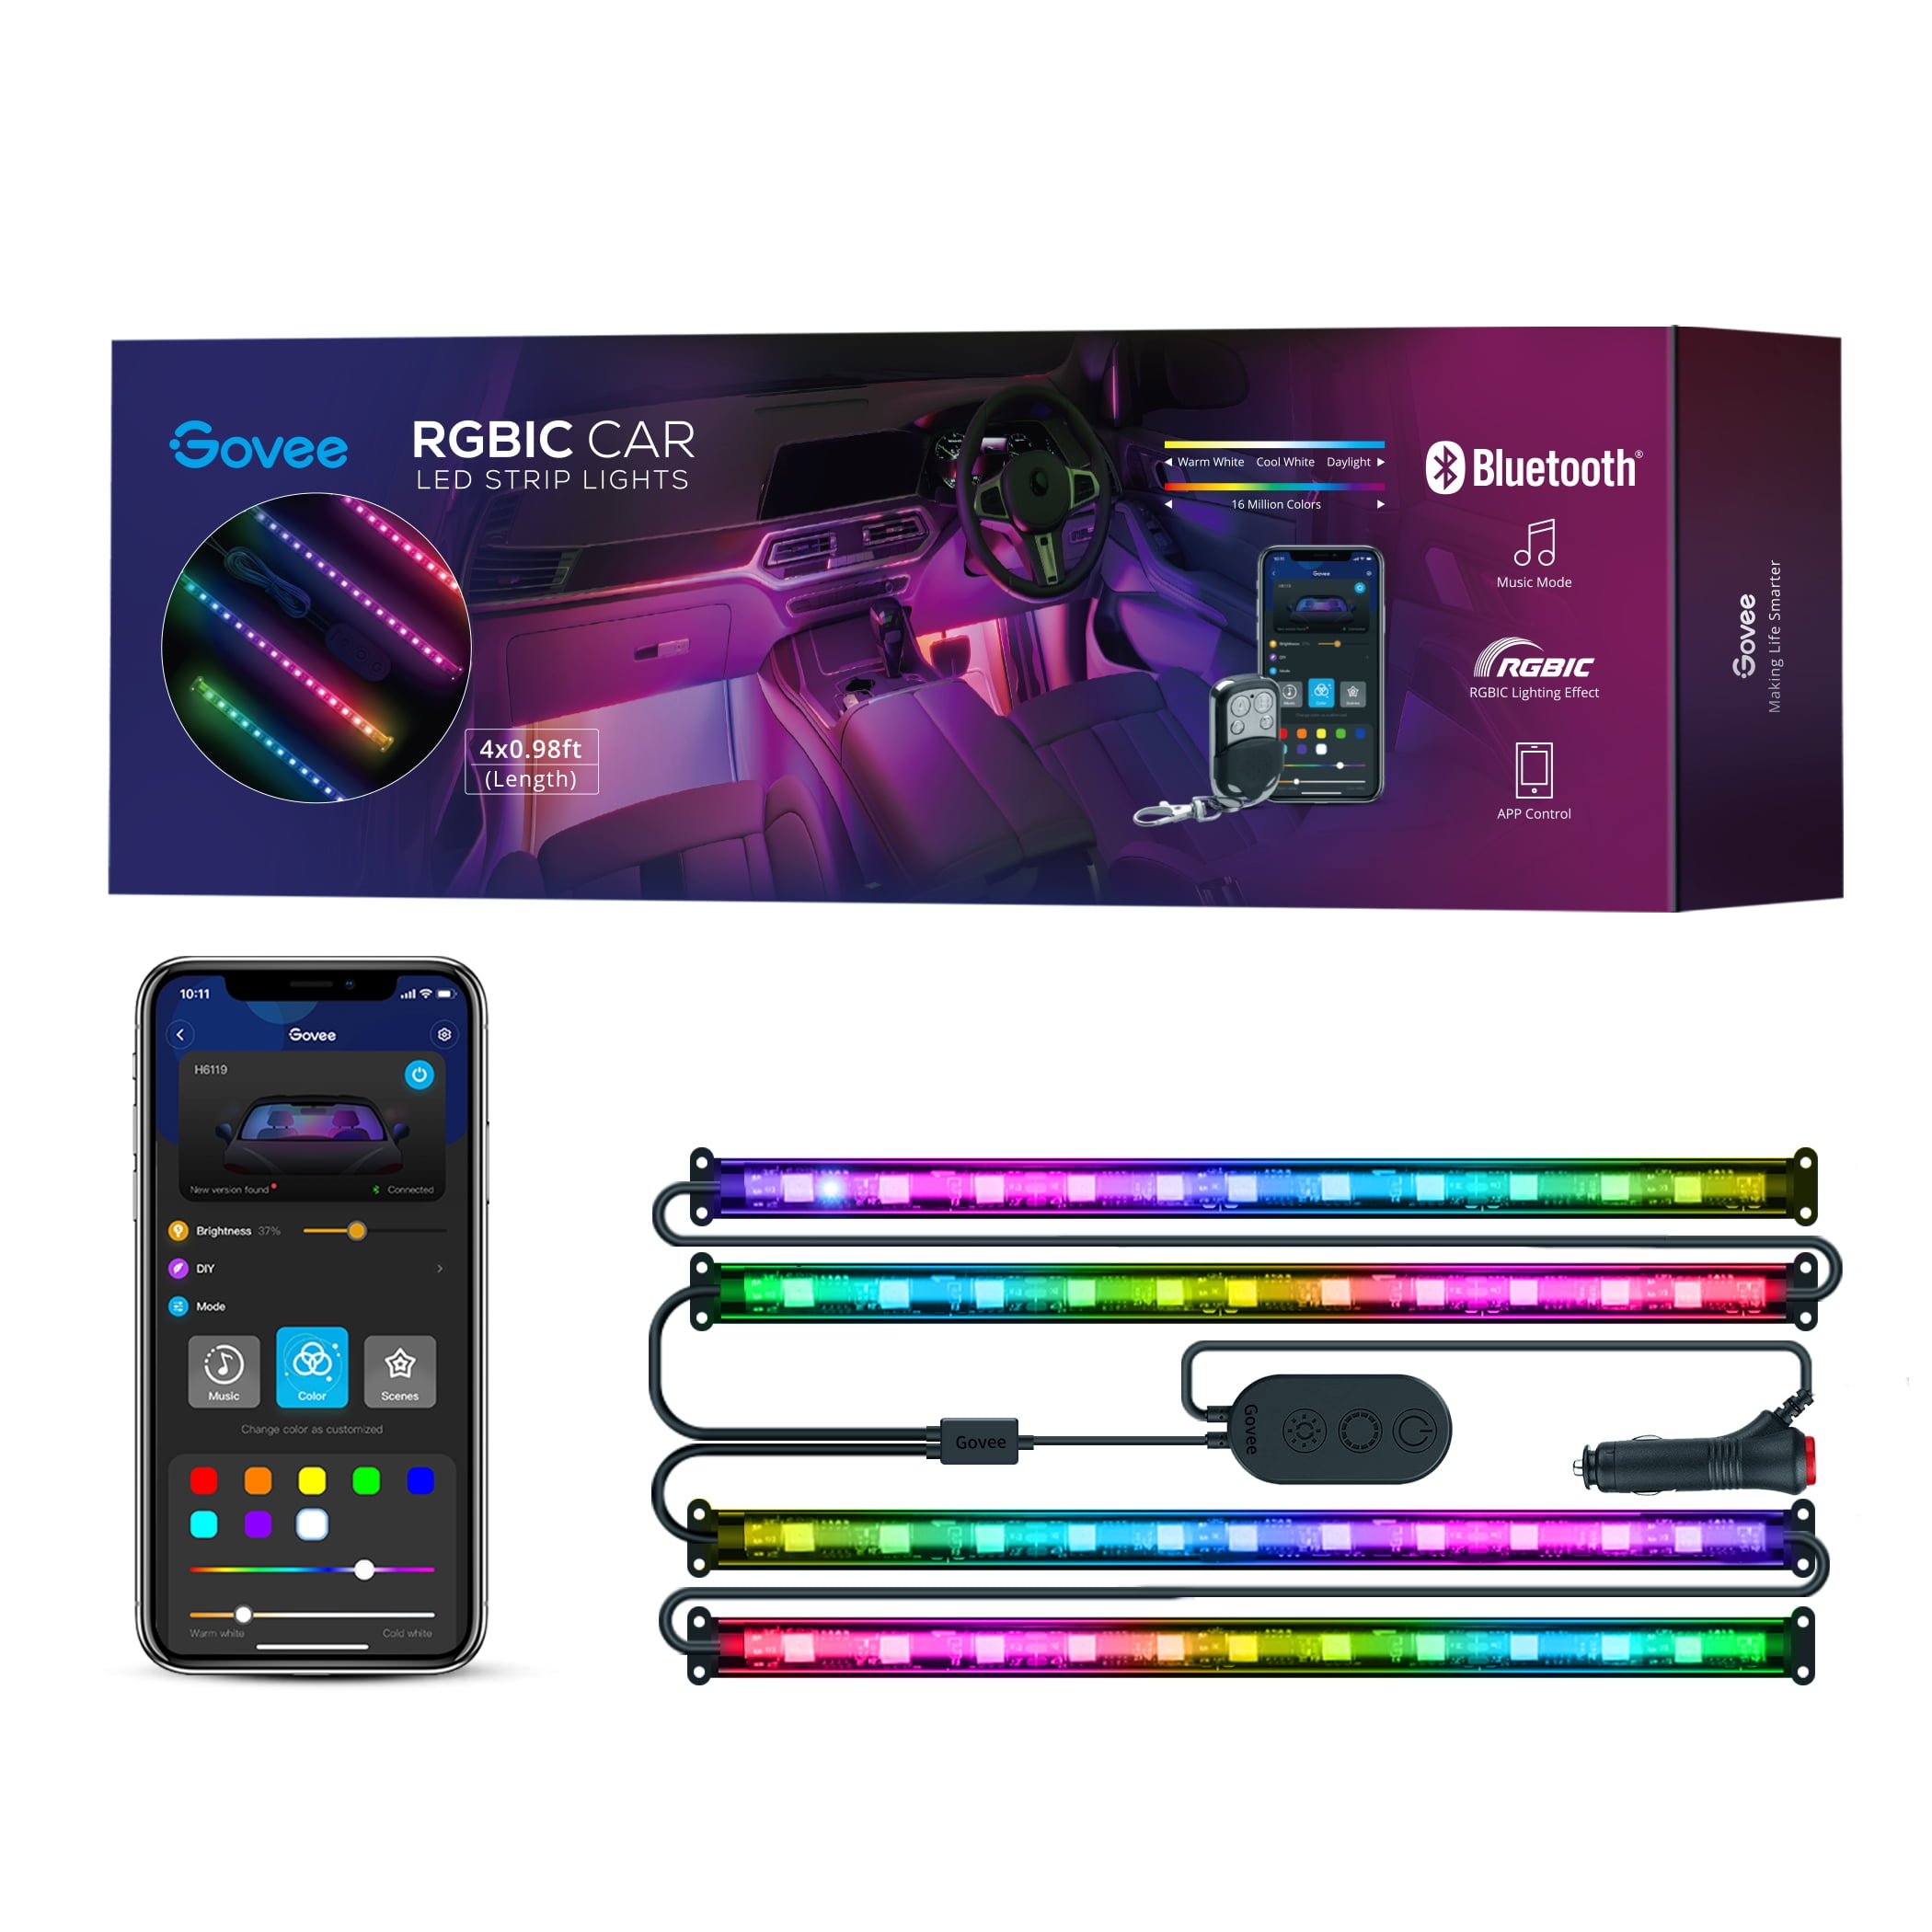 Govee LED RGBIC Interior Car Lights, APP and Remote Control, Music